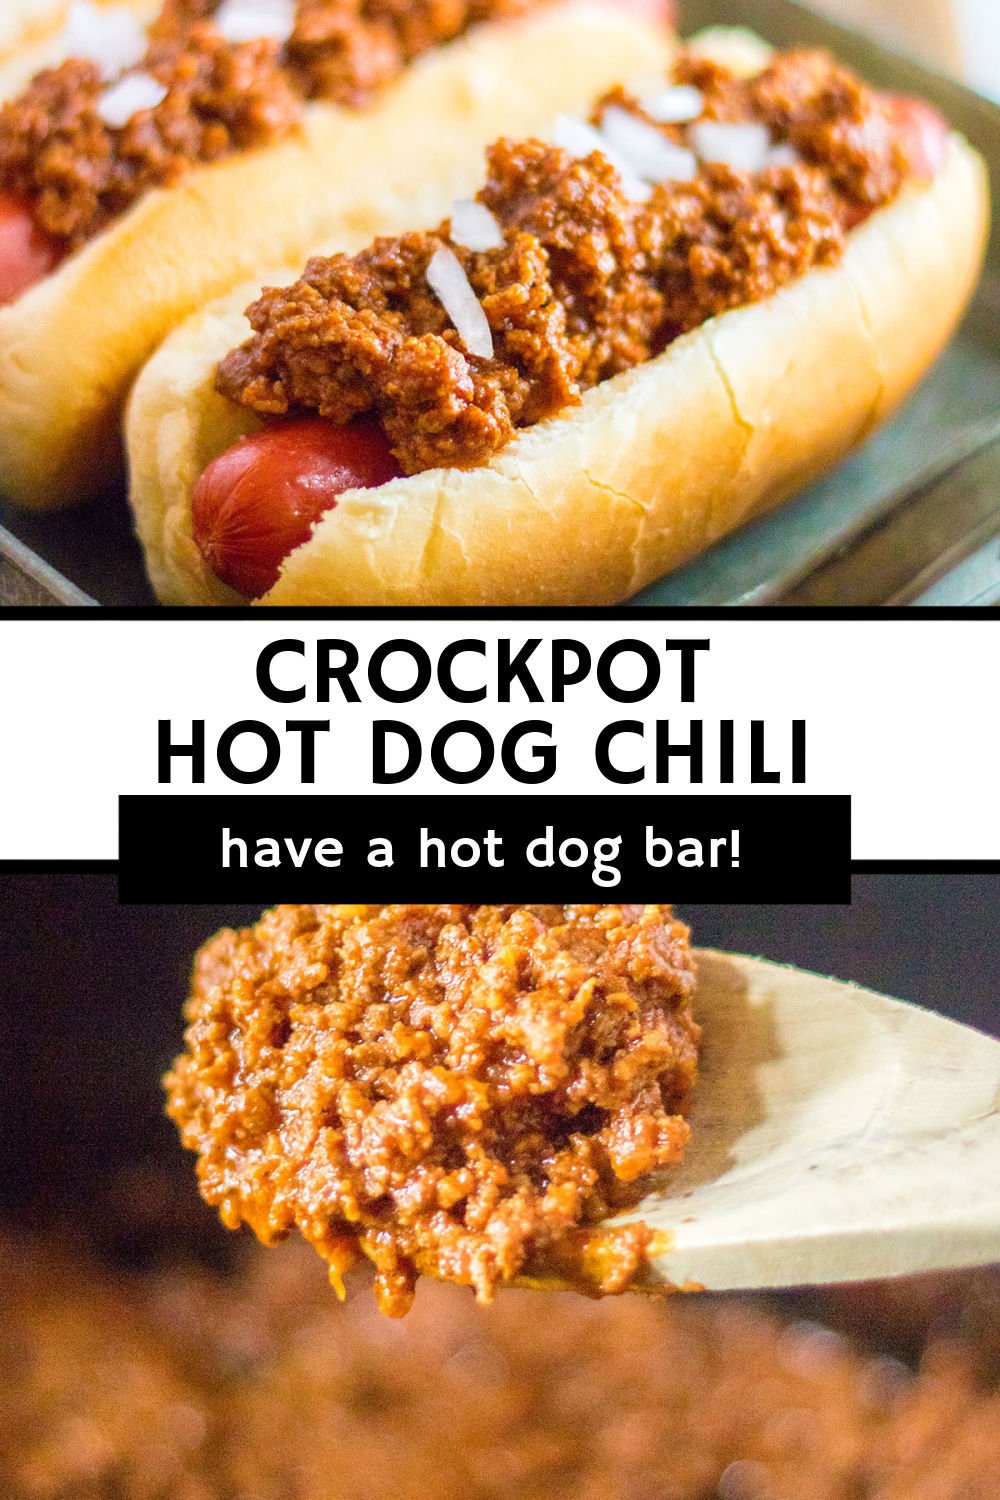 Full of flavor, this Crockpot Hot Dog Chili makes an ordinary hot dog extra delicious. Made in the slow cooker, it is the perfect addition to a hot dog bar with toppings, or serving on top of fries or burgers! | www.persnicketyplates.com